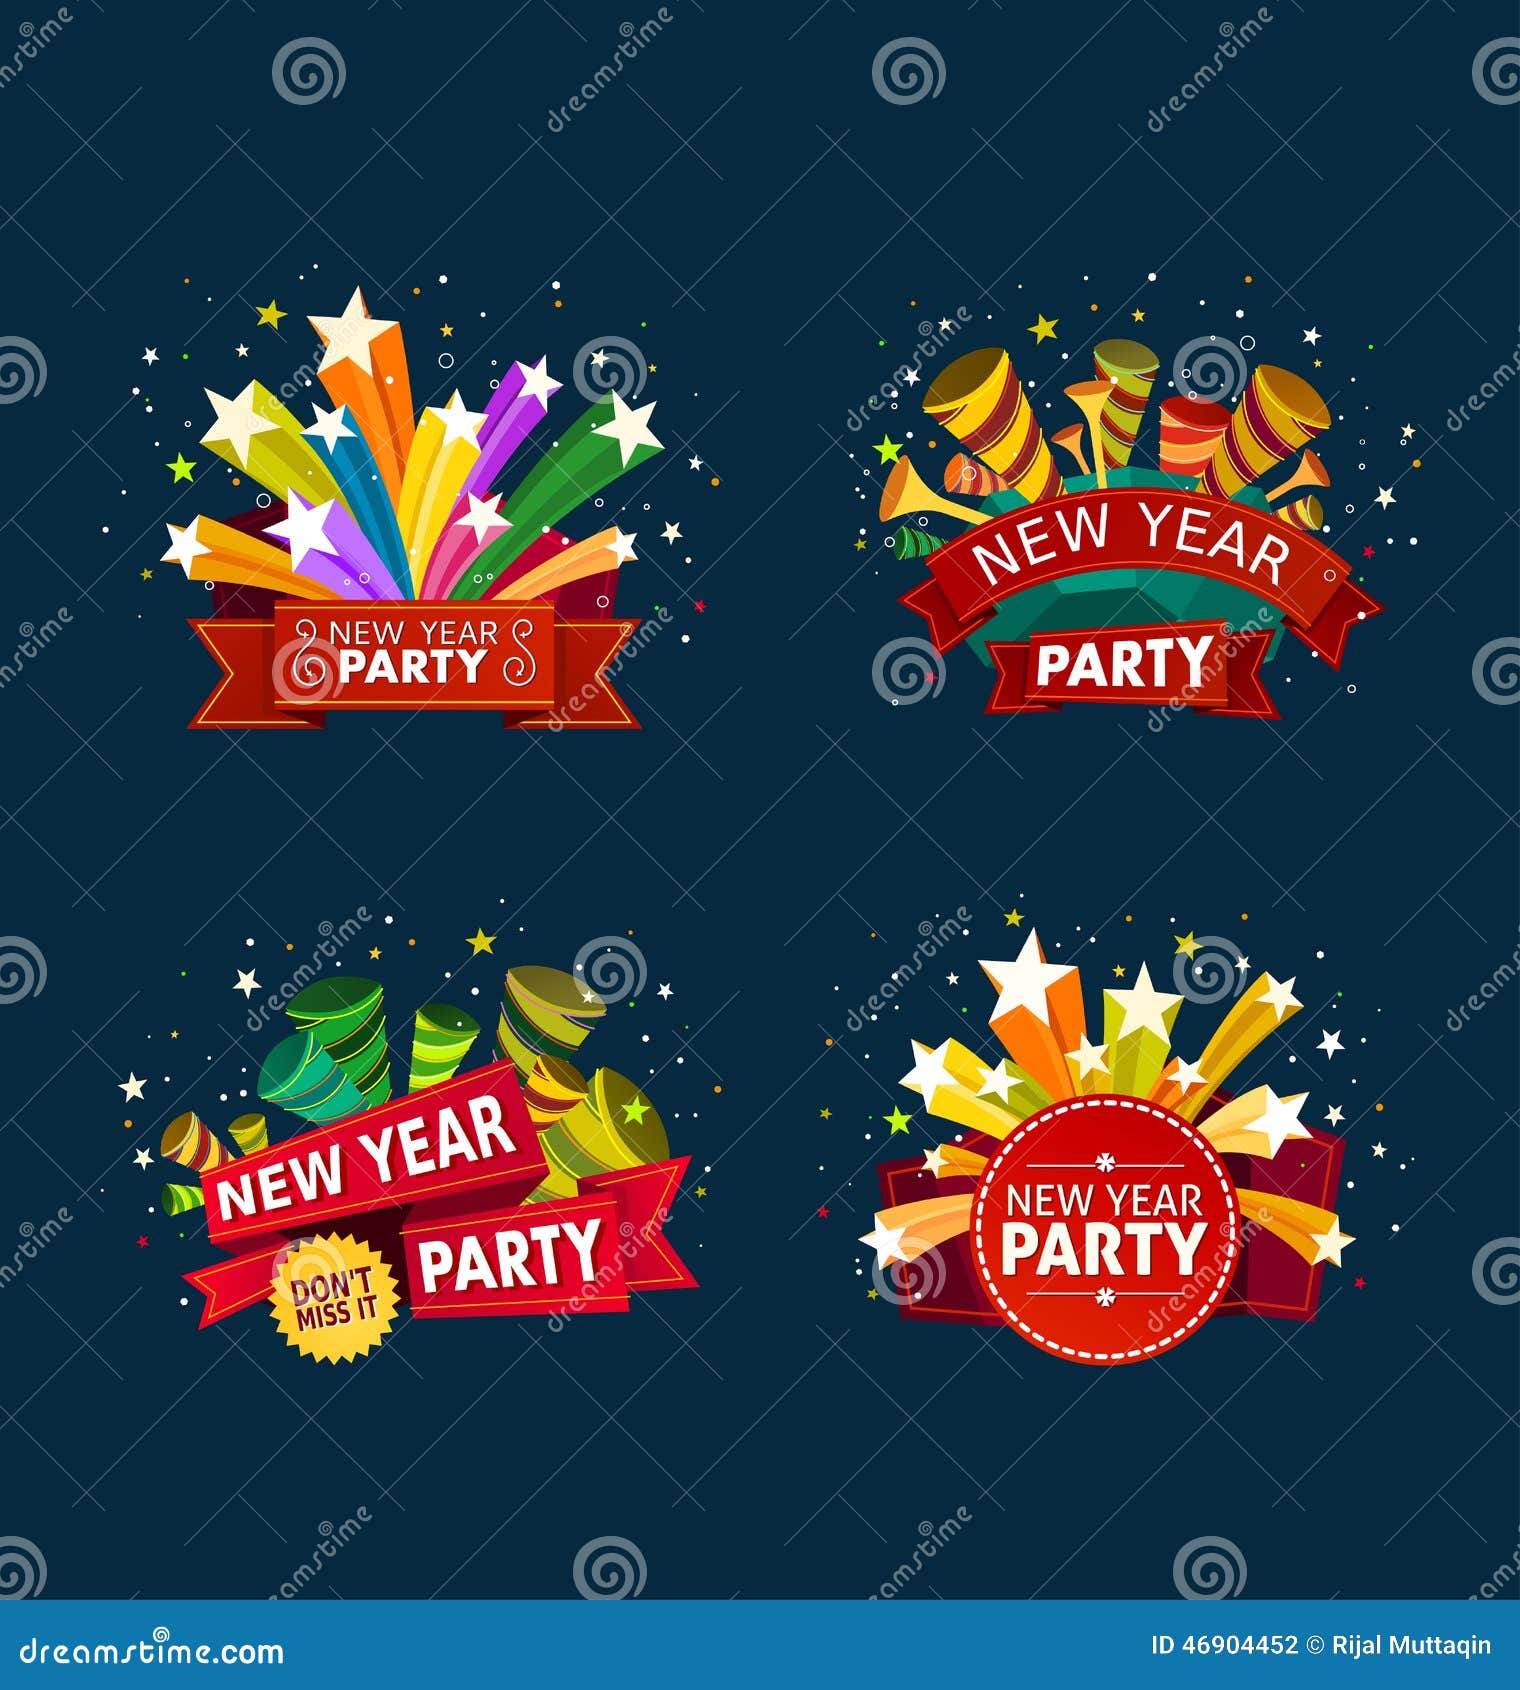 new year party event tittle